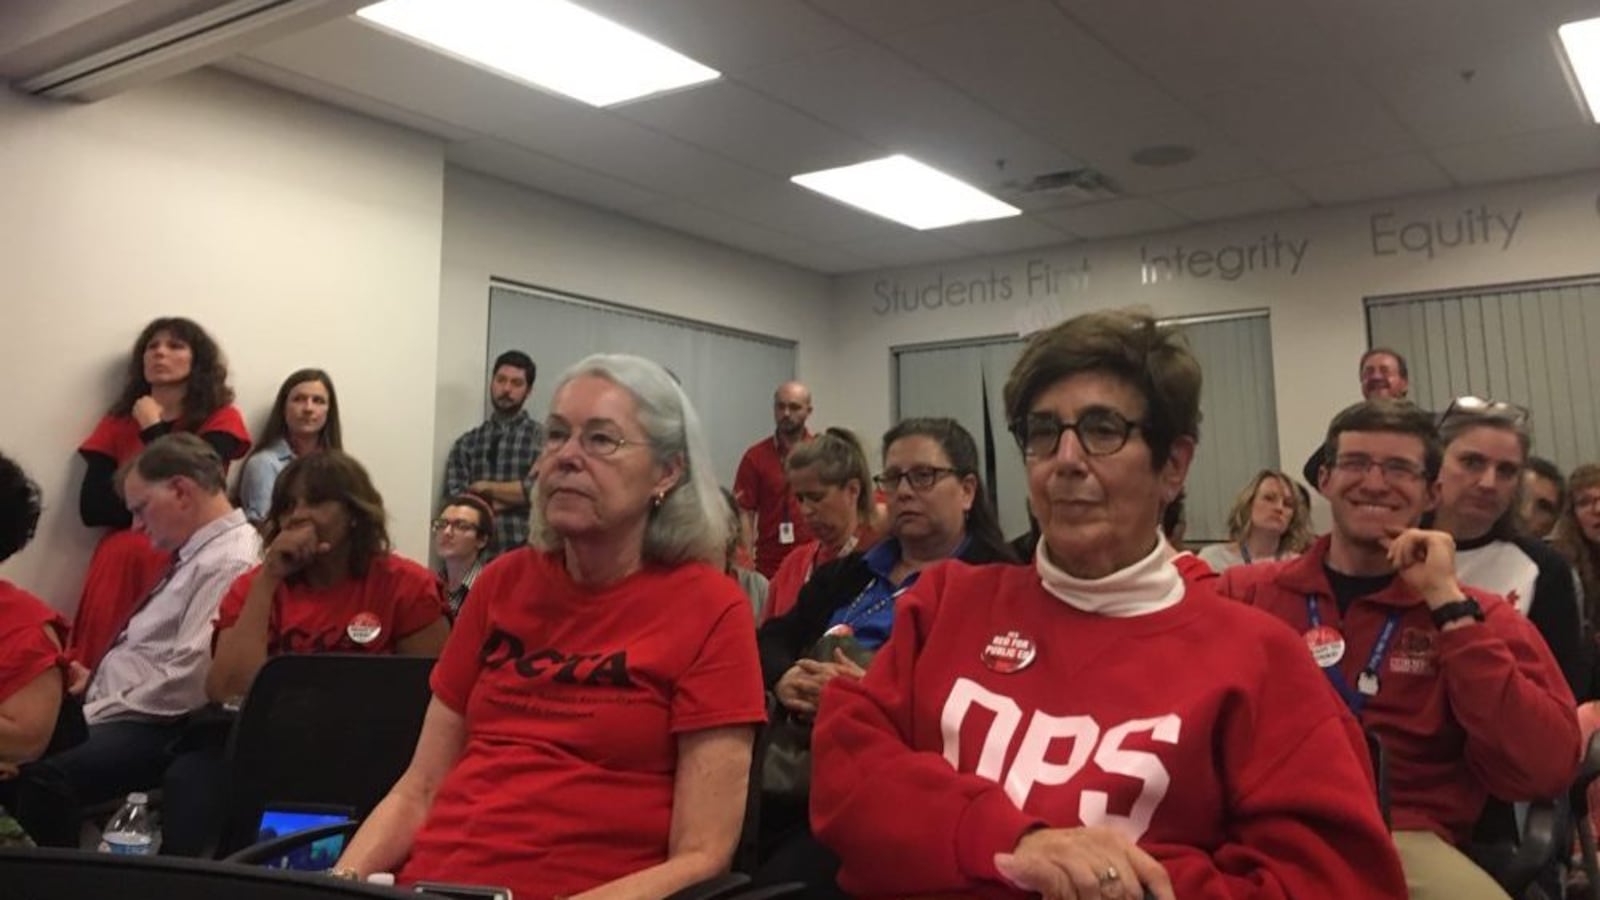 Denver teachers listen to an update on bargaining during the second to last day of negotiations before the ProComp contract expires.